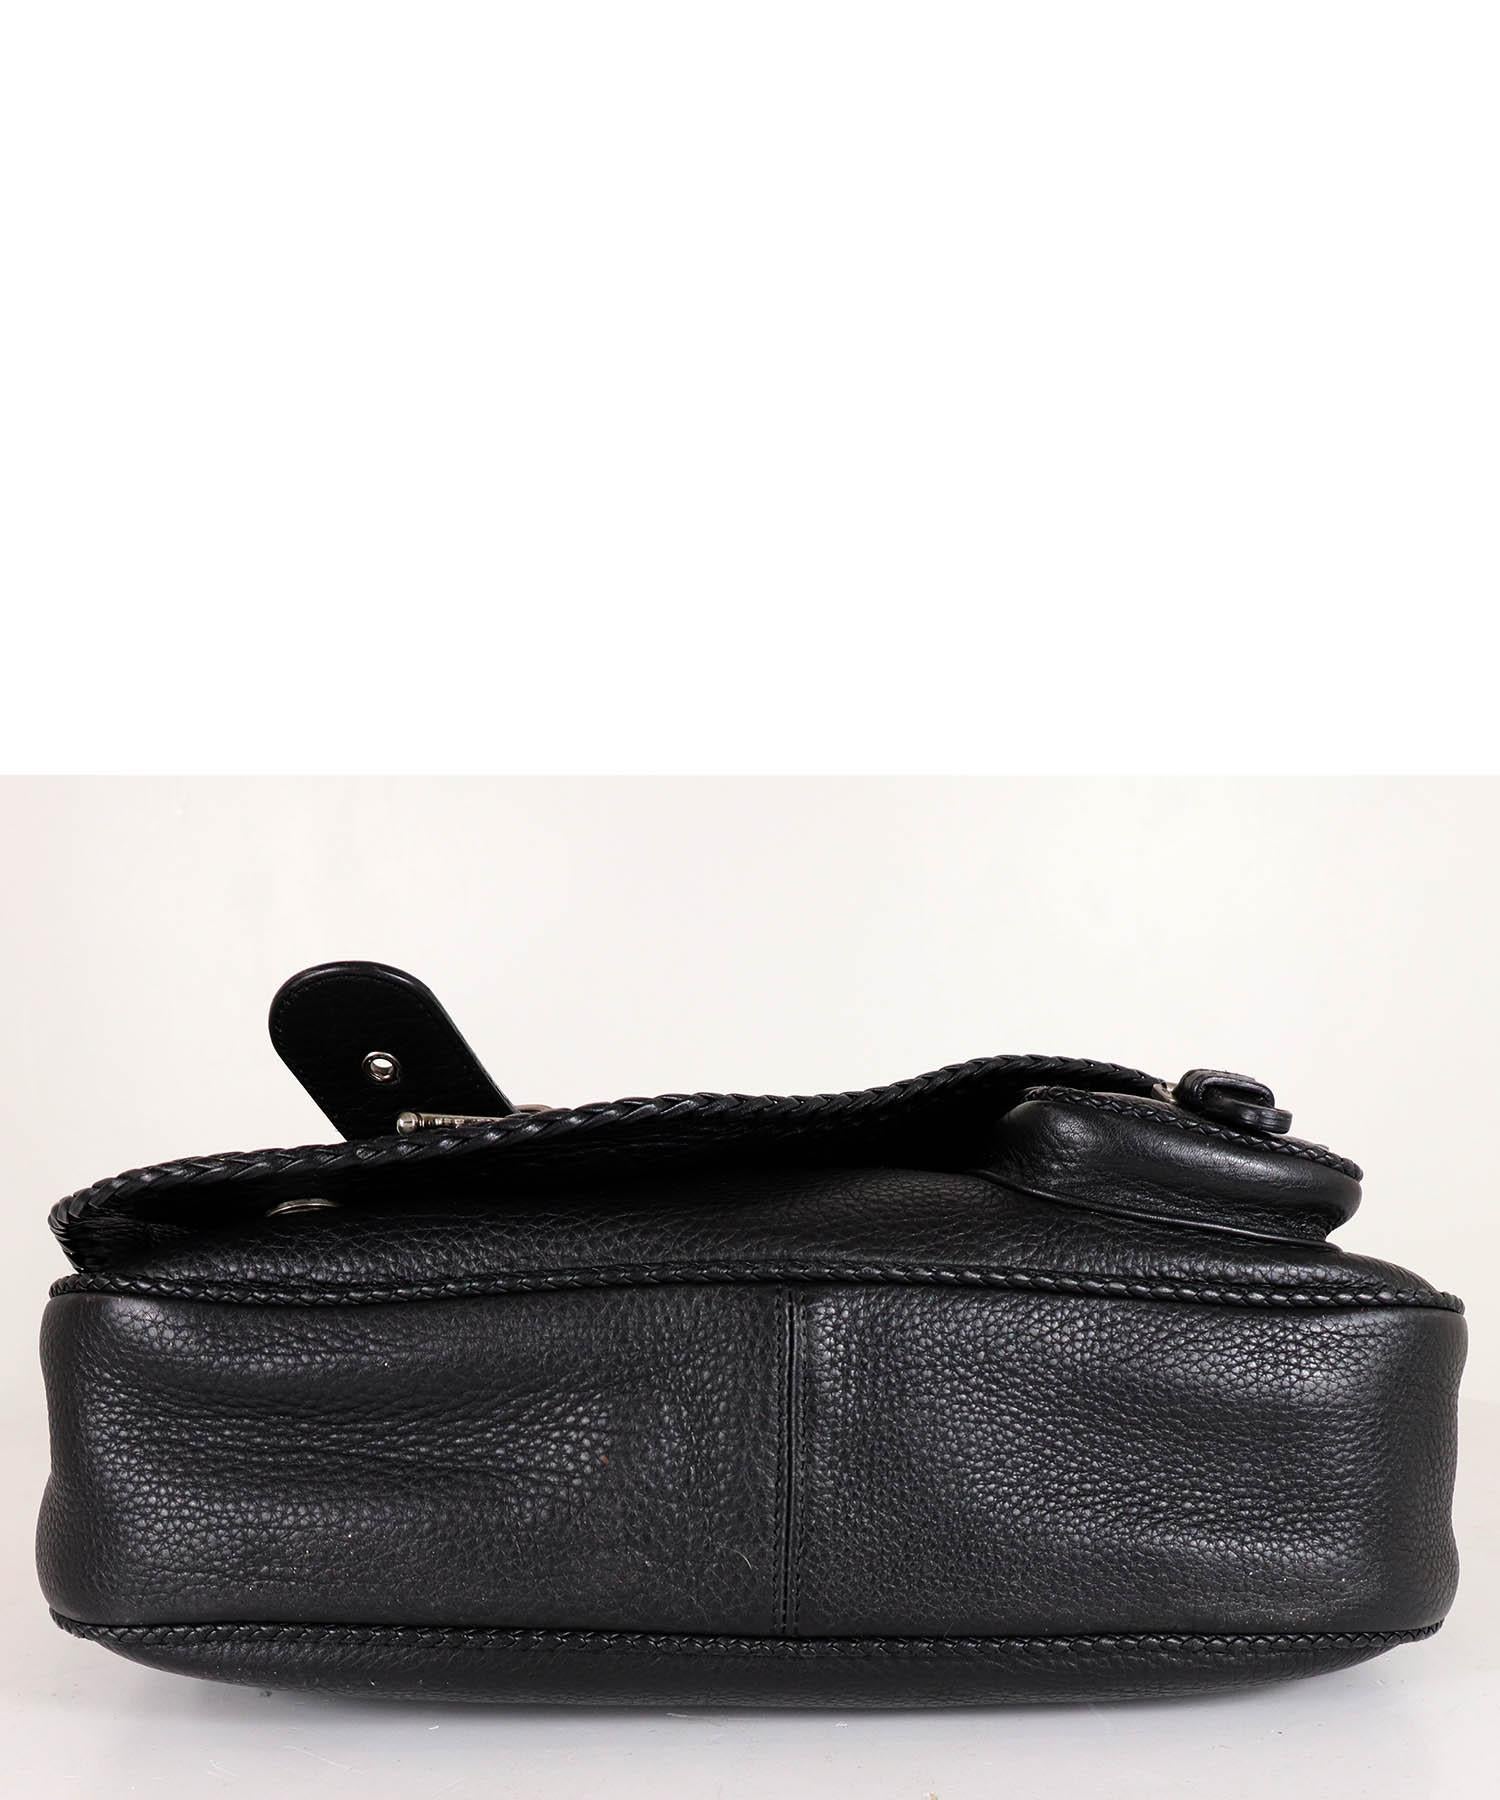 Women's or Men's Christian Dior Black Whipstitched Gaucho Double Saddle Bag 2006